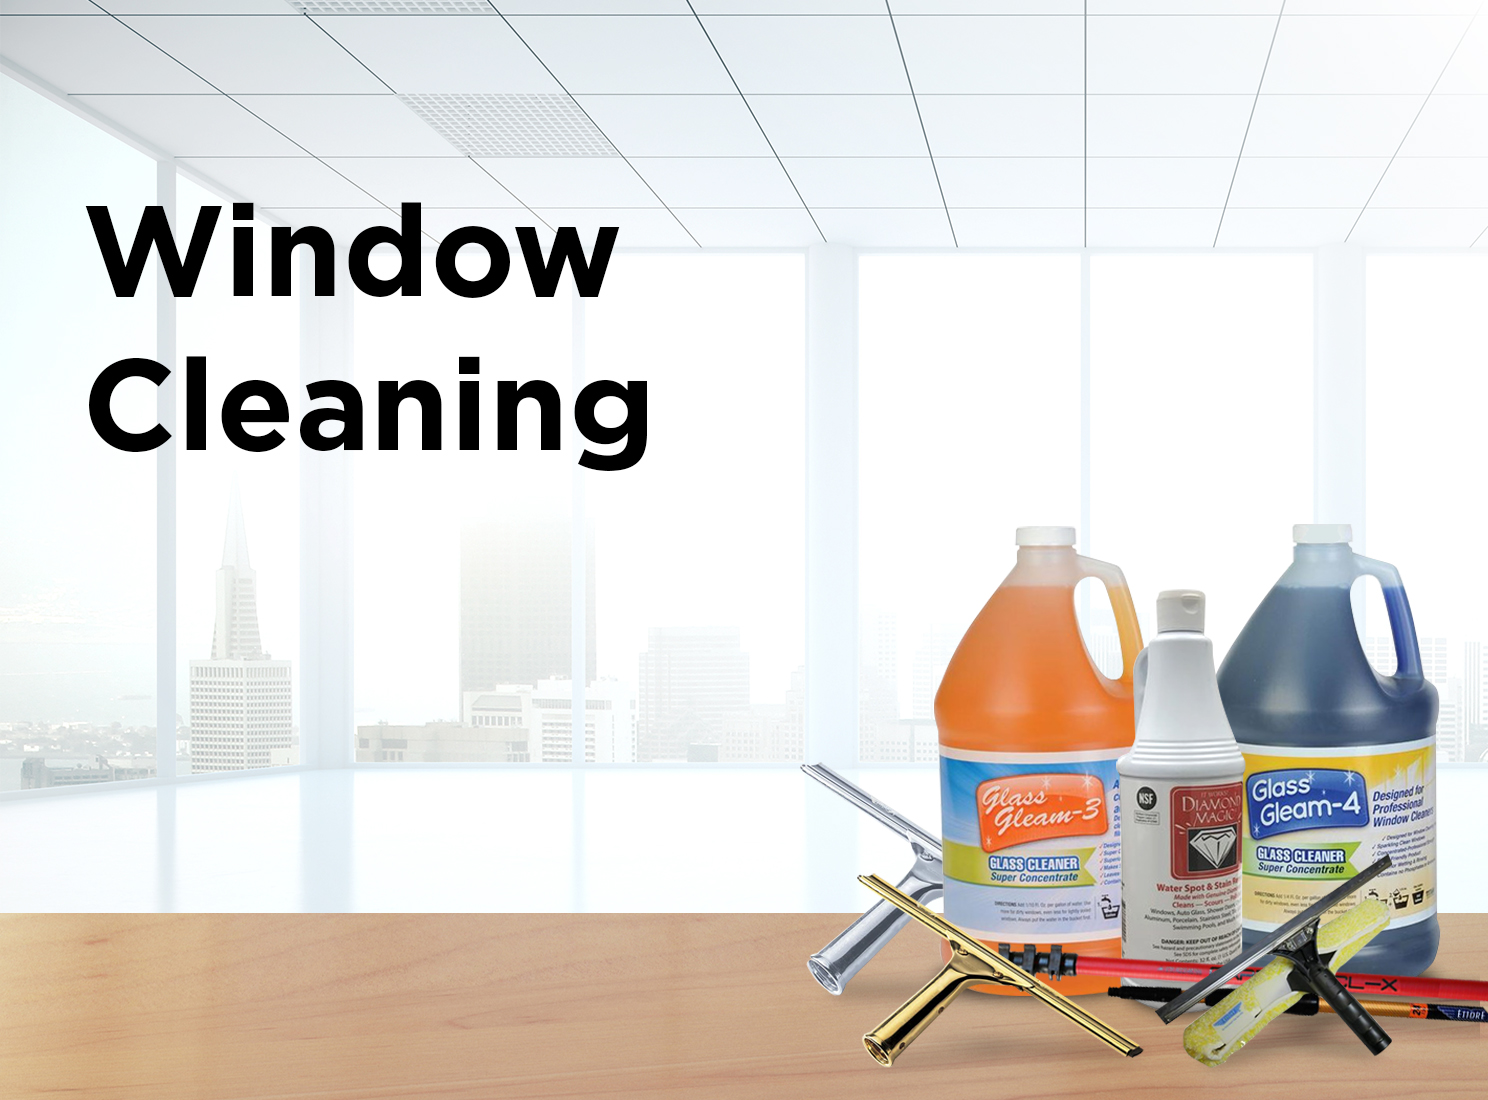 Houston Commercial Window Cleaning Services Guide - DTK Inc